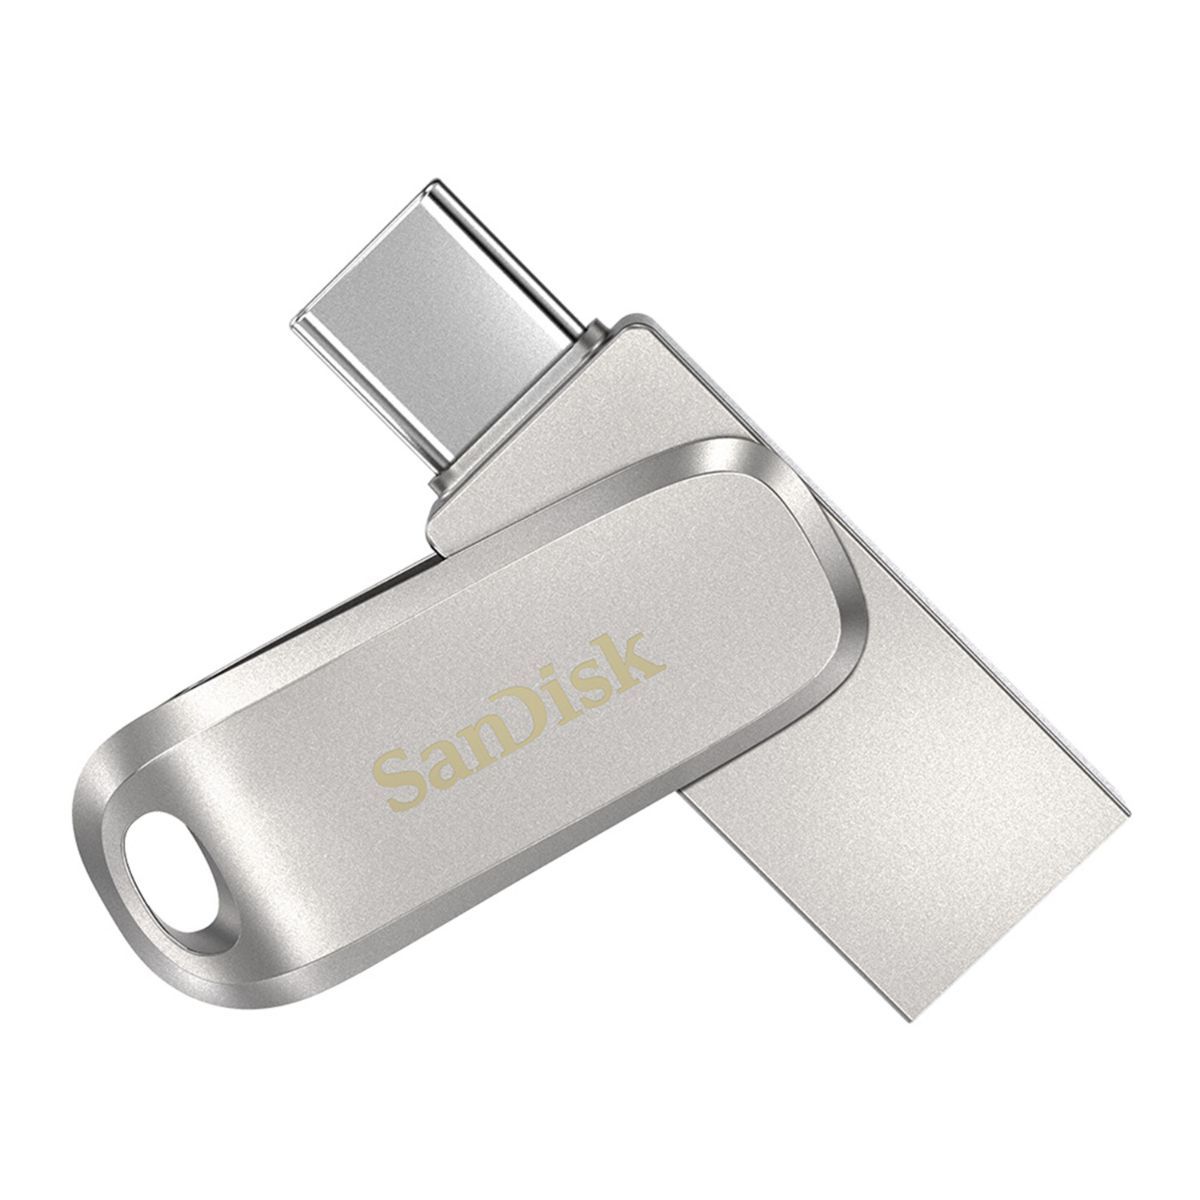 SanDisk Ultra Dual Drive Luxe USB Type-C 512GB, Metal Pendrive for Mobile